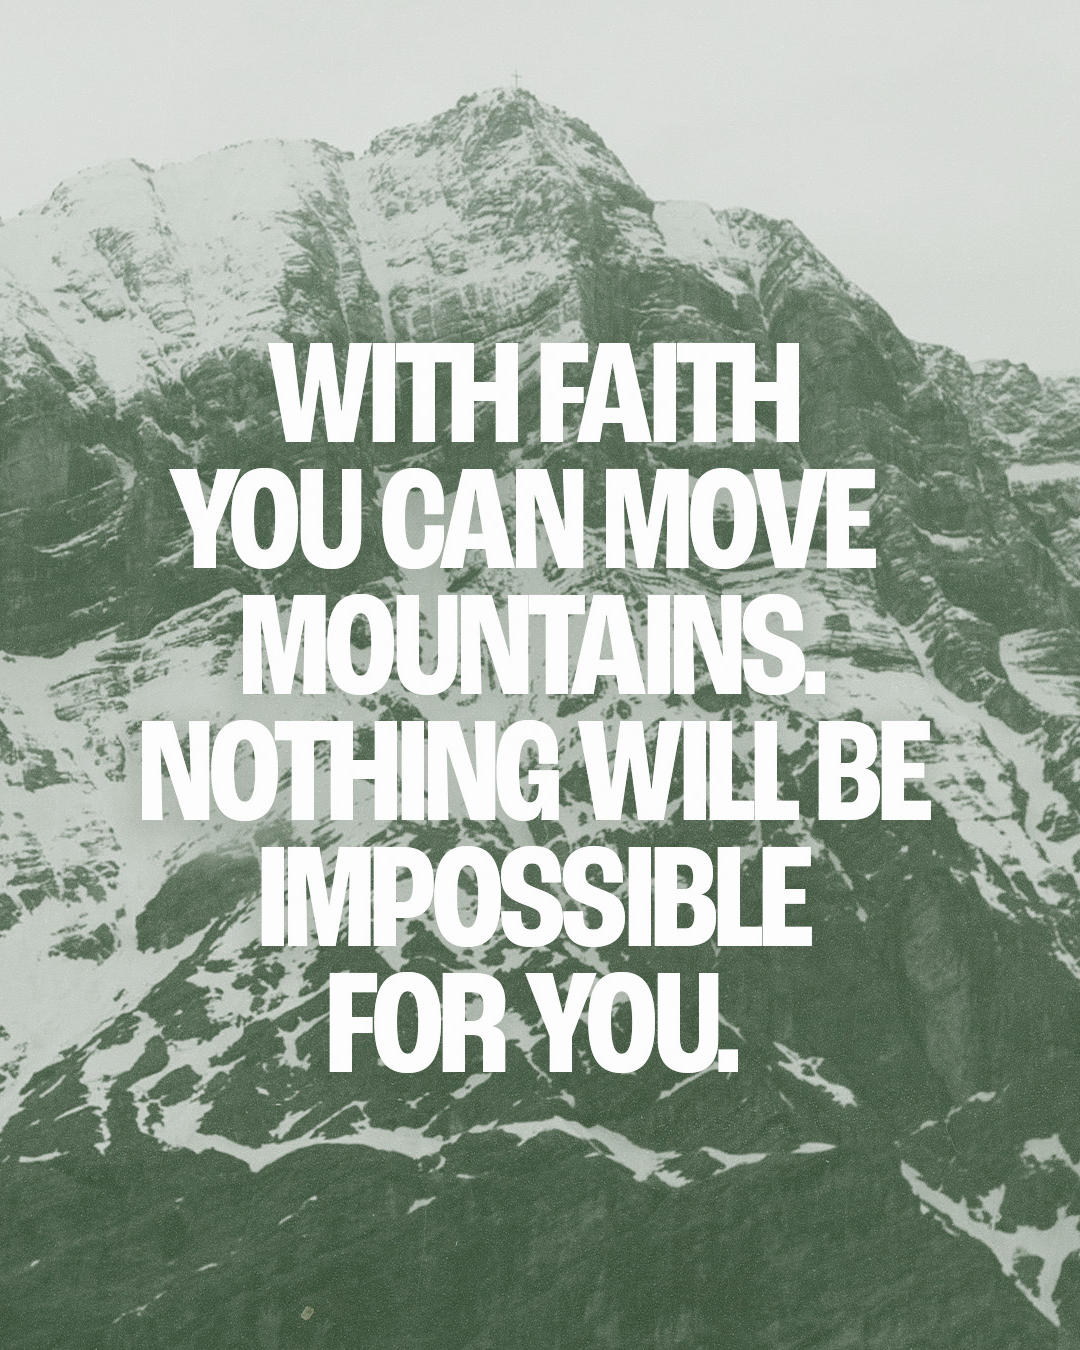 With faith you can move mountains.